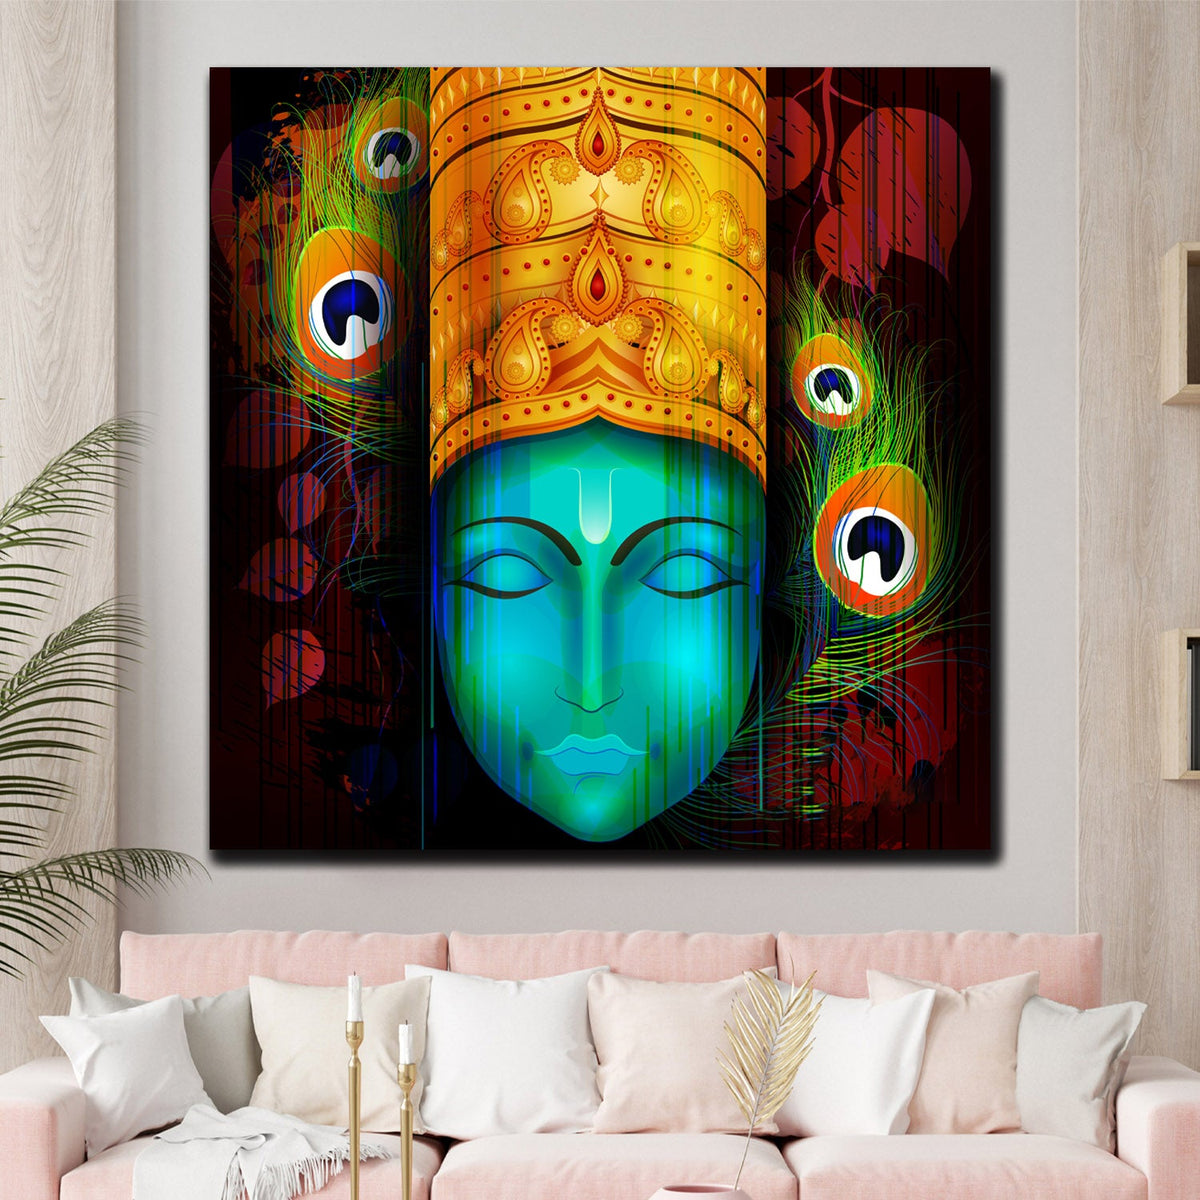 https://cdn.shopify.com/s/files/1/0387/9986/8044/products/LordKrishnawithCrownCanvasArtprintStretched-1.jpg